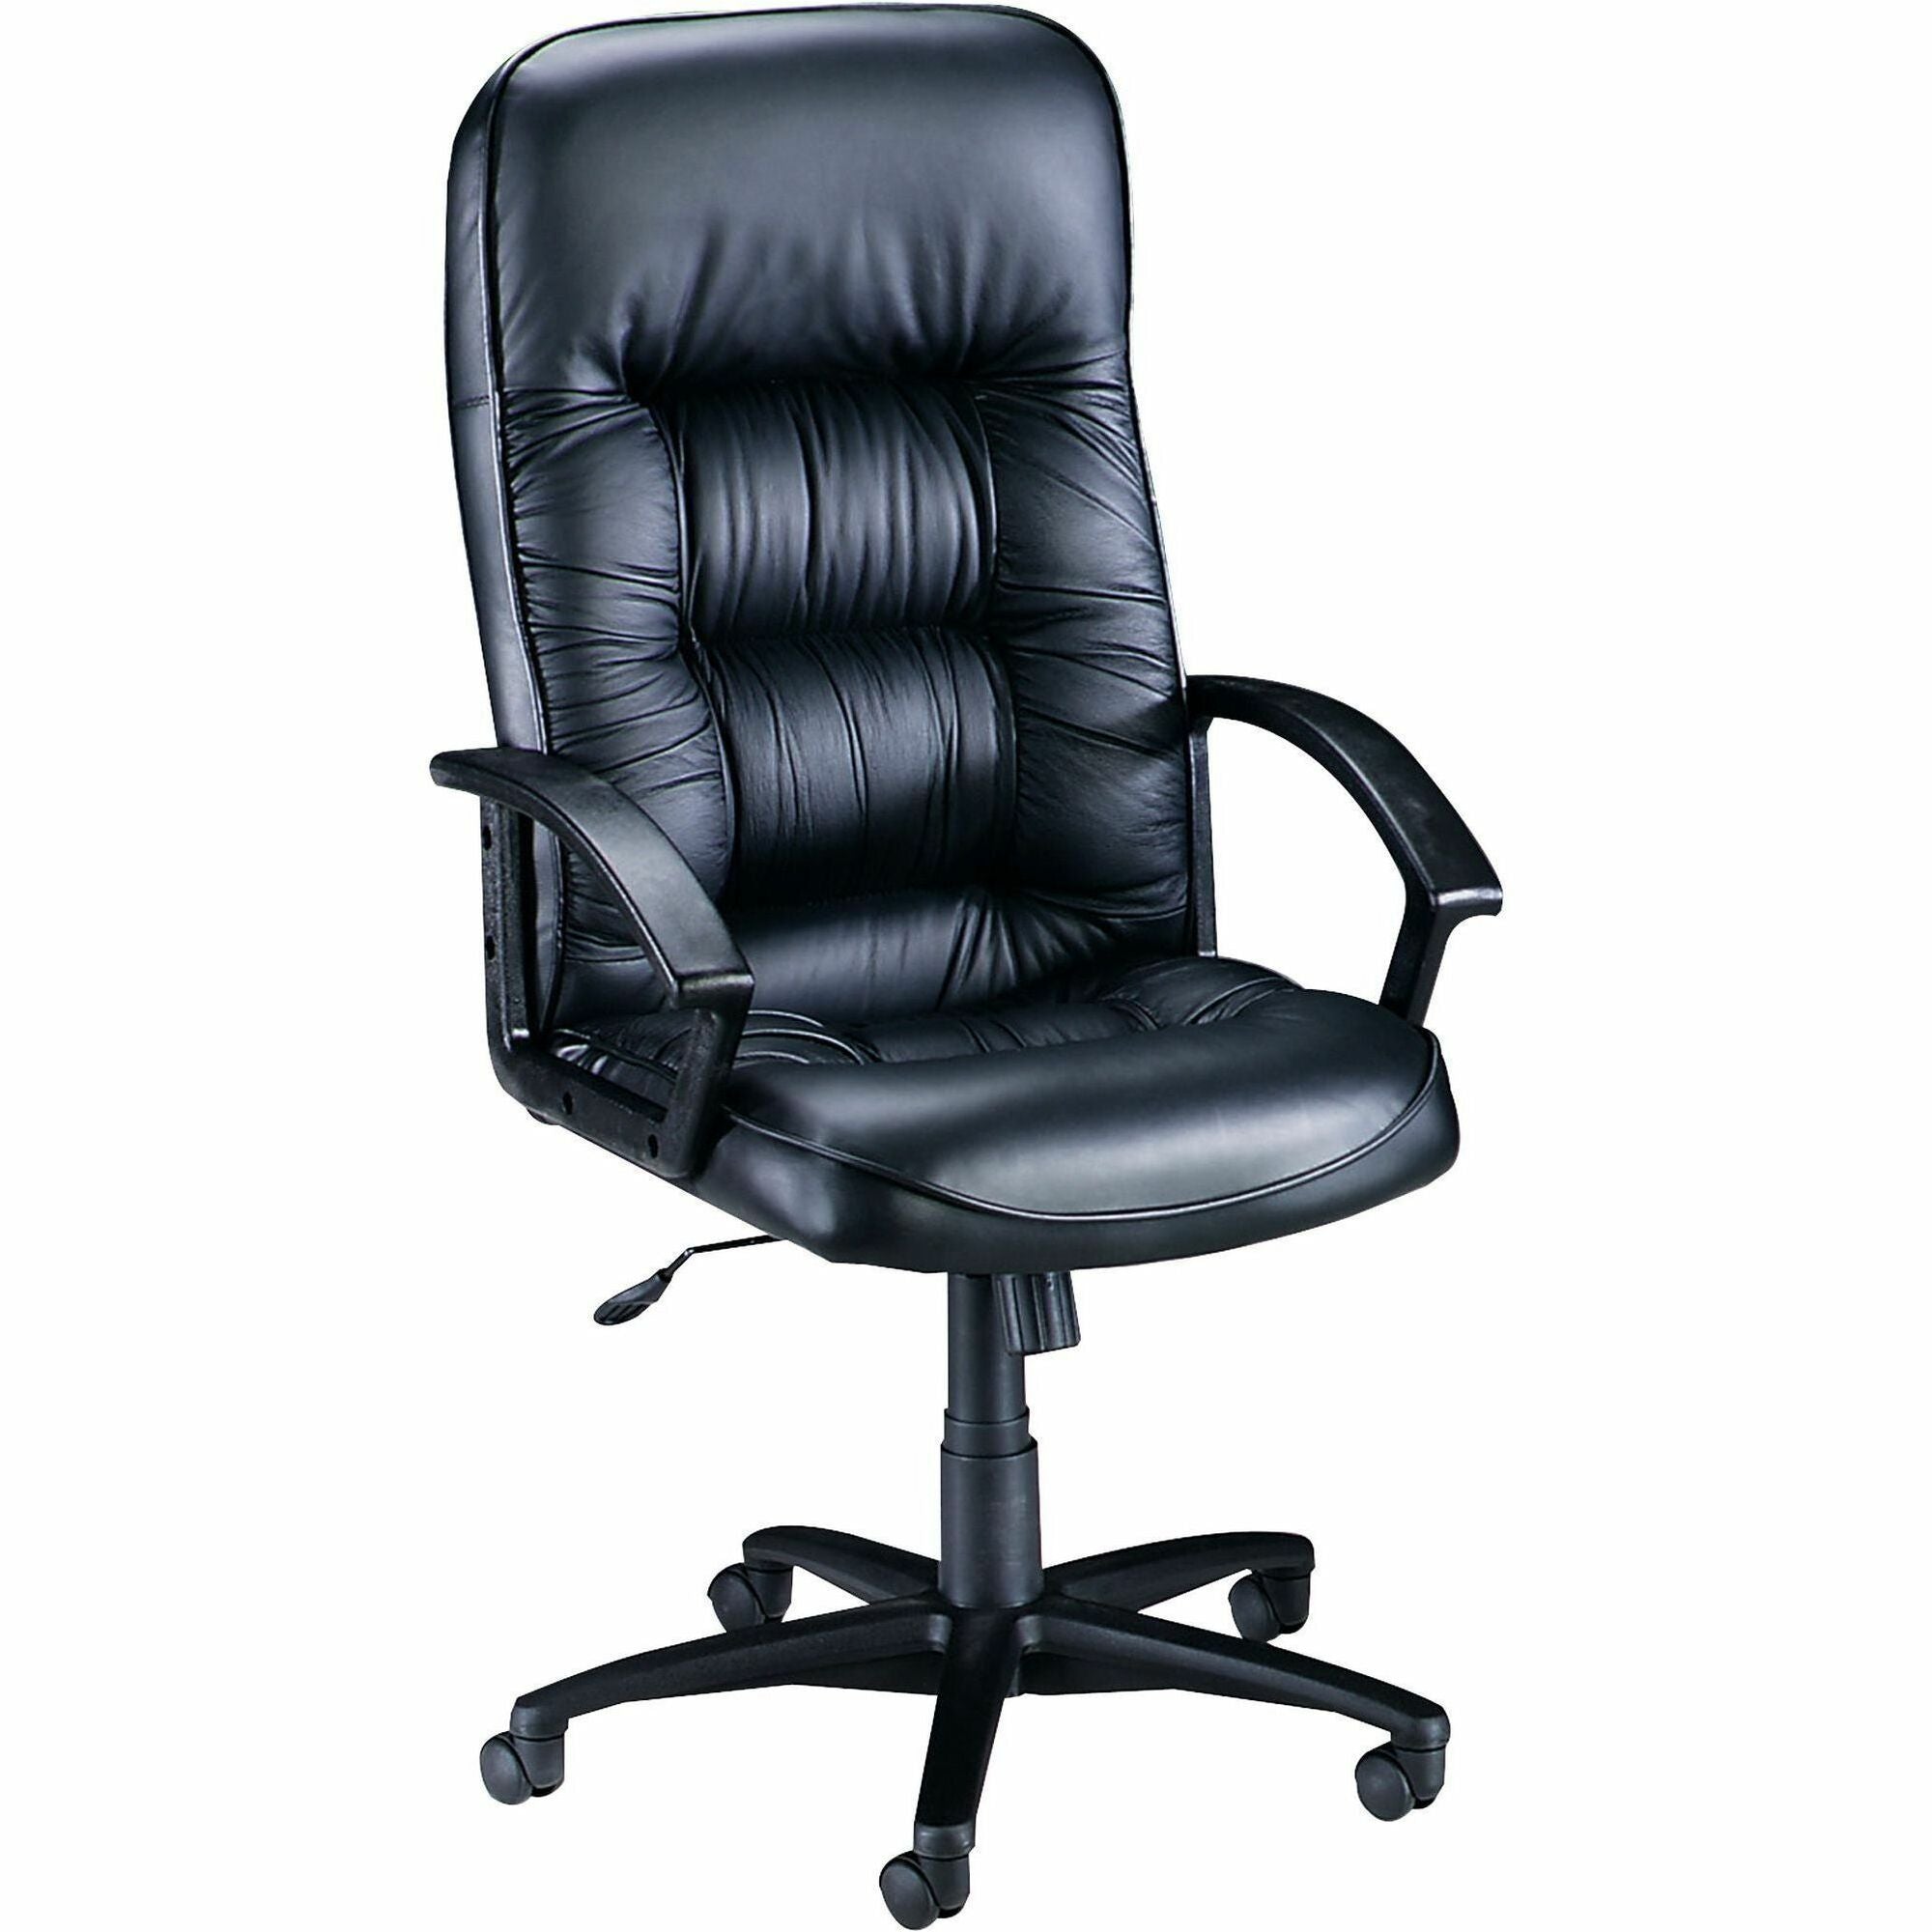 Lorell Tufted Executive High-Back Office Chair - Black Leather Seat - Black Frame - 5-star Base - Black - 1 Each - 